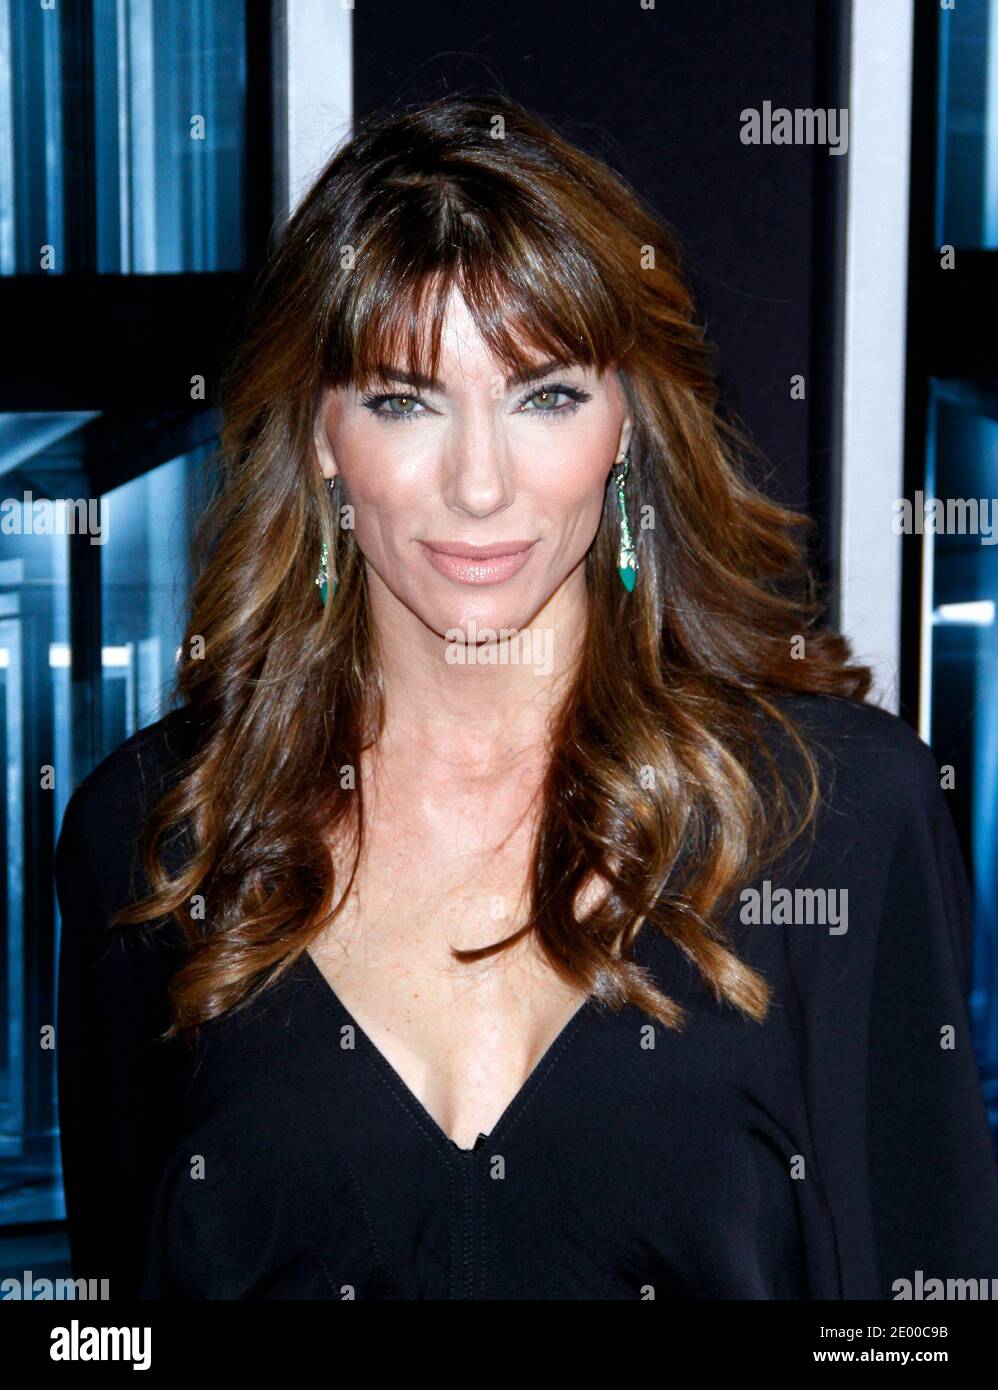 Jennifer Flavin attends the 'Escape Plan' screening at the Regal Theater on 42nd Street in New York City, NY, USA on October 15, 2013. Photo by Donna Ward/ABACAPRESS.COM Stock Photo